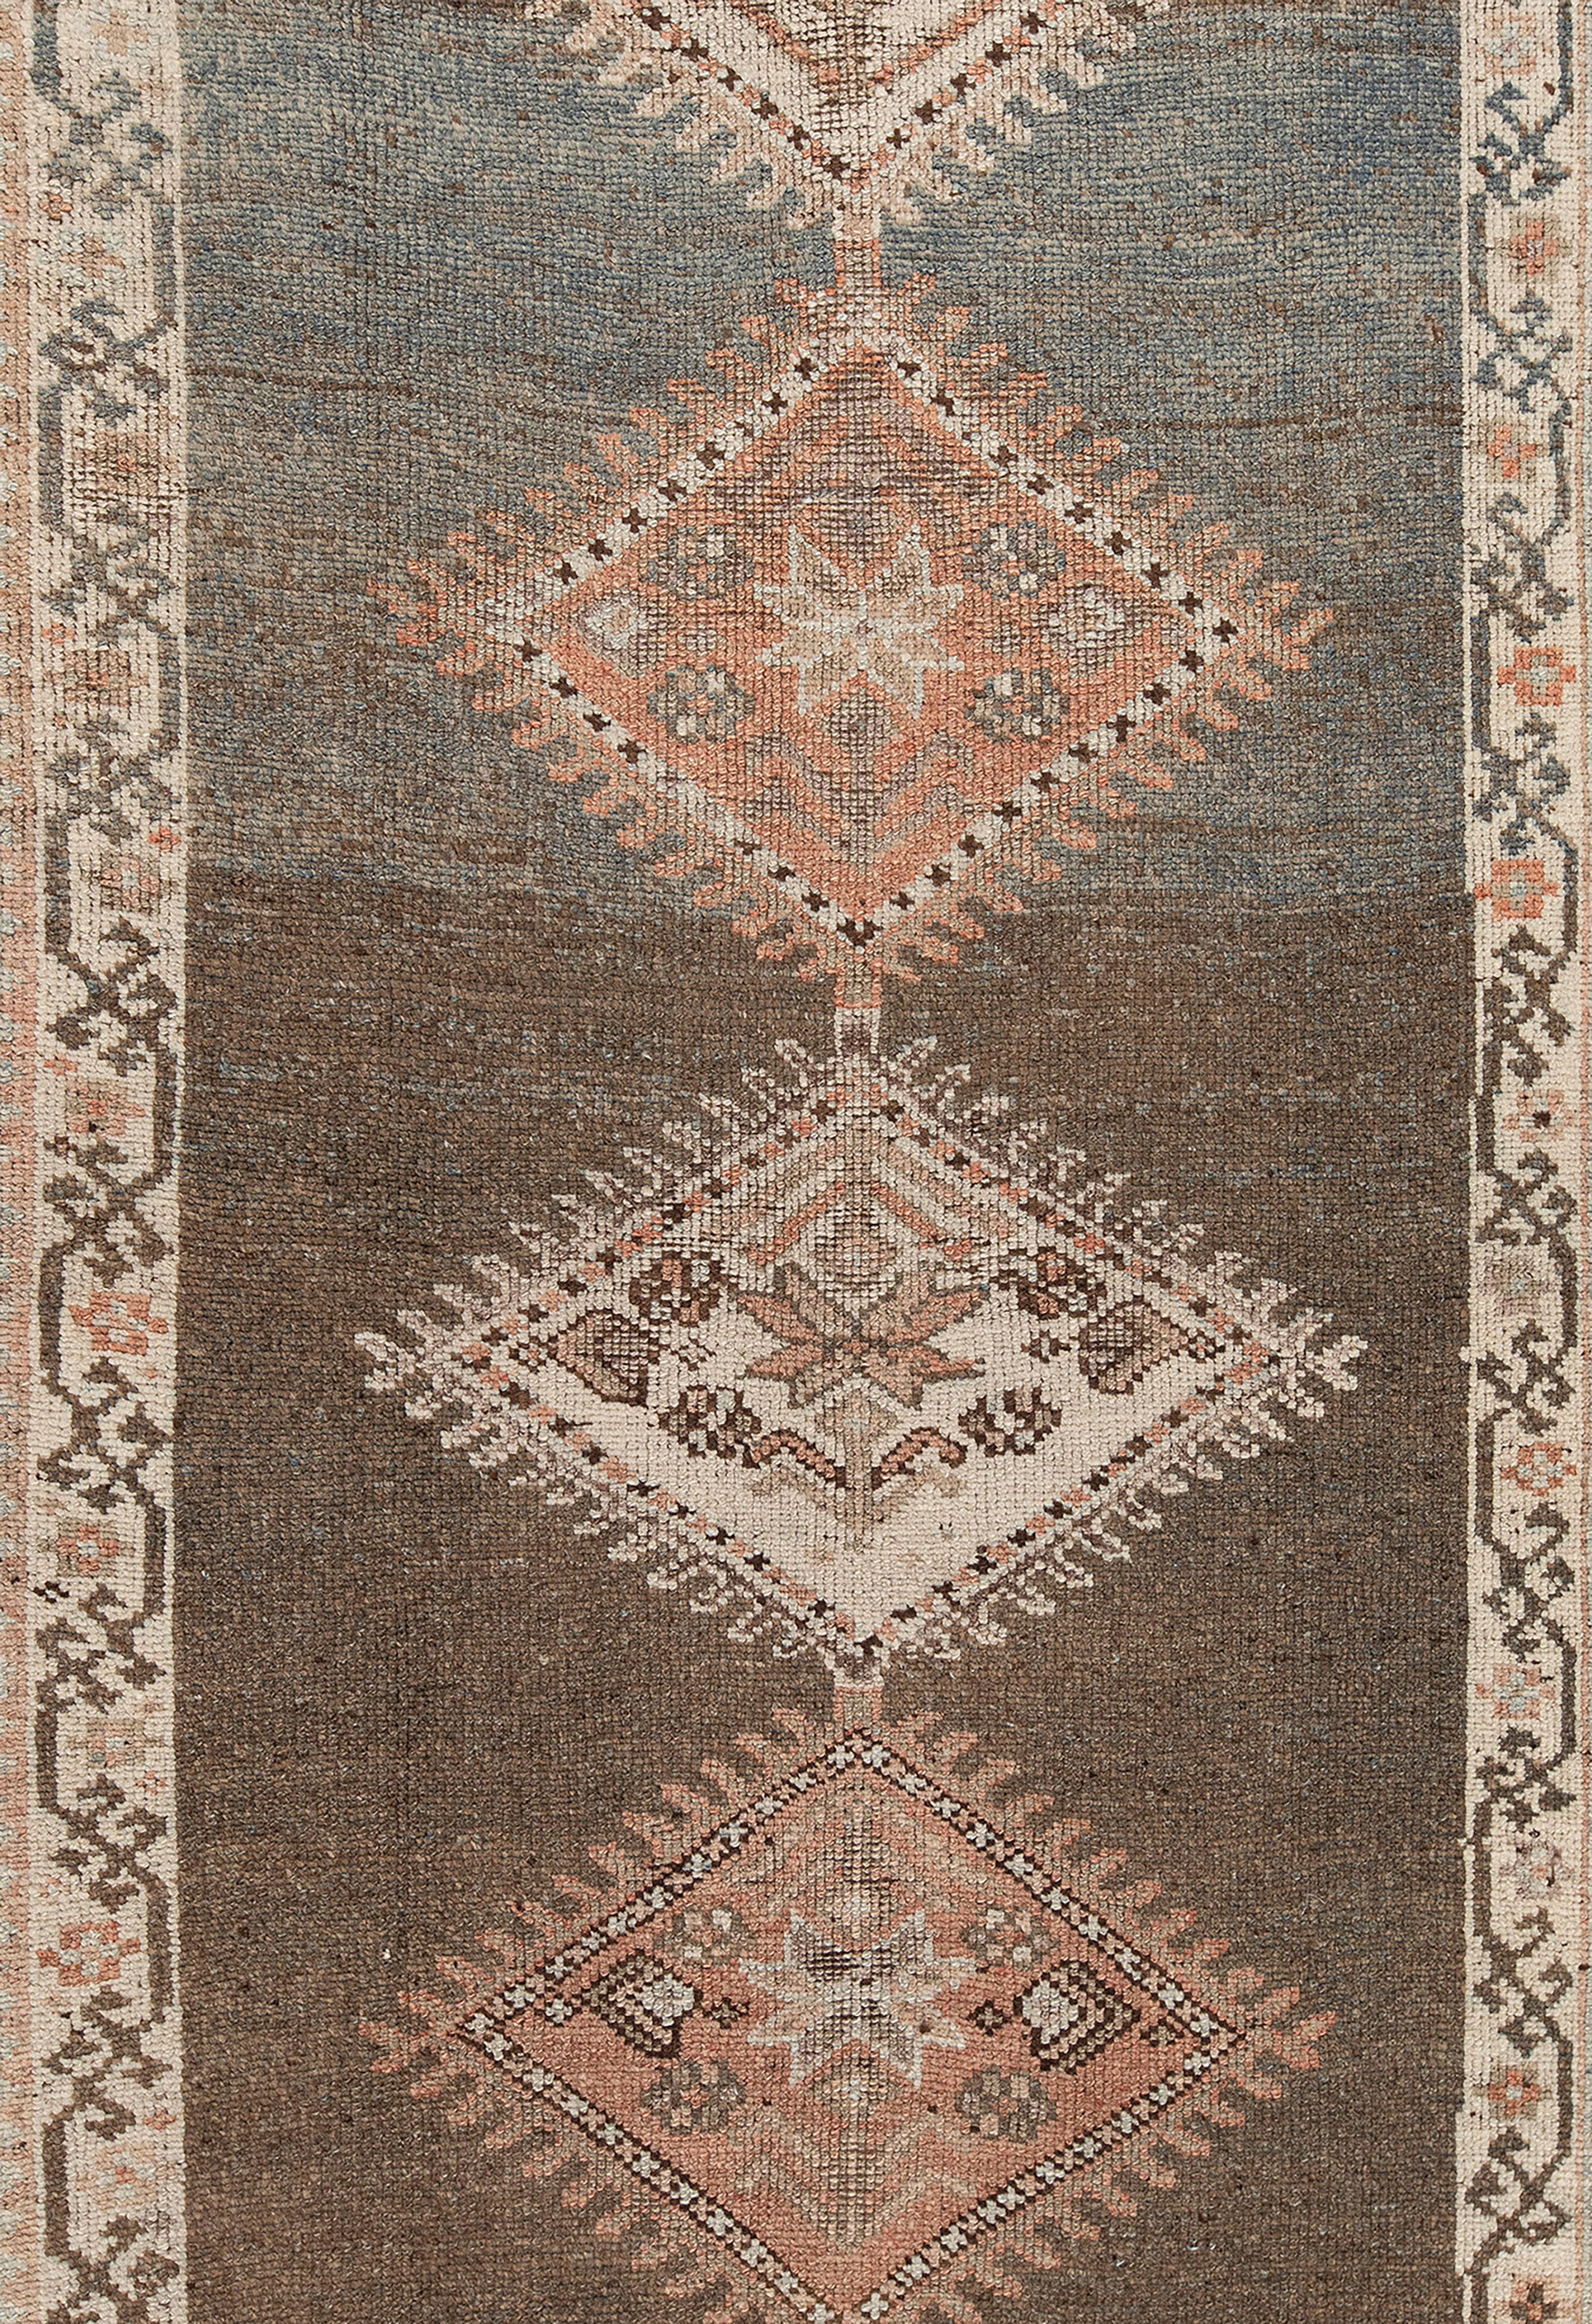 This is a beautiful antique Persian Kurdish runner circa 1910s in impeccable condition. This rug is skillfully sourced by N A S I R I through extensive travel, passion, and research.  Kurdish rugs are named after a major rug weaving region in west